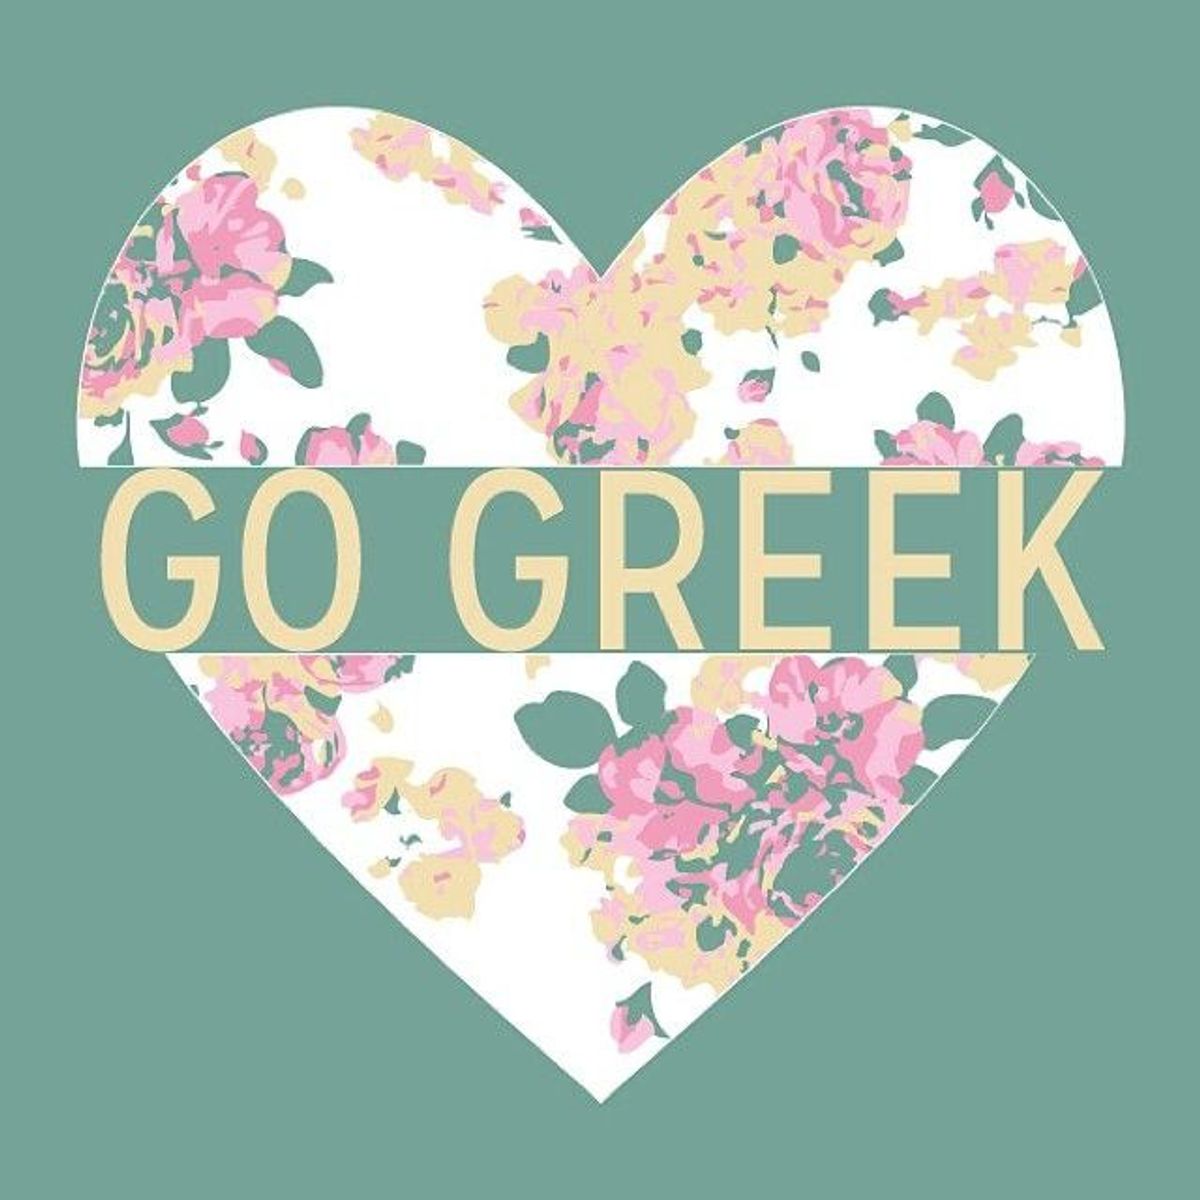 5 Reasons Why I Am Thankful For My Sorority